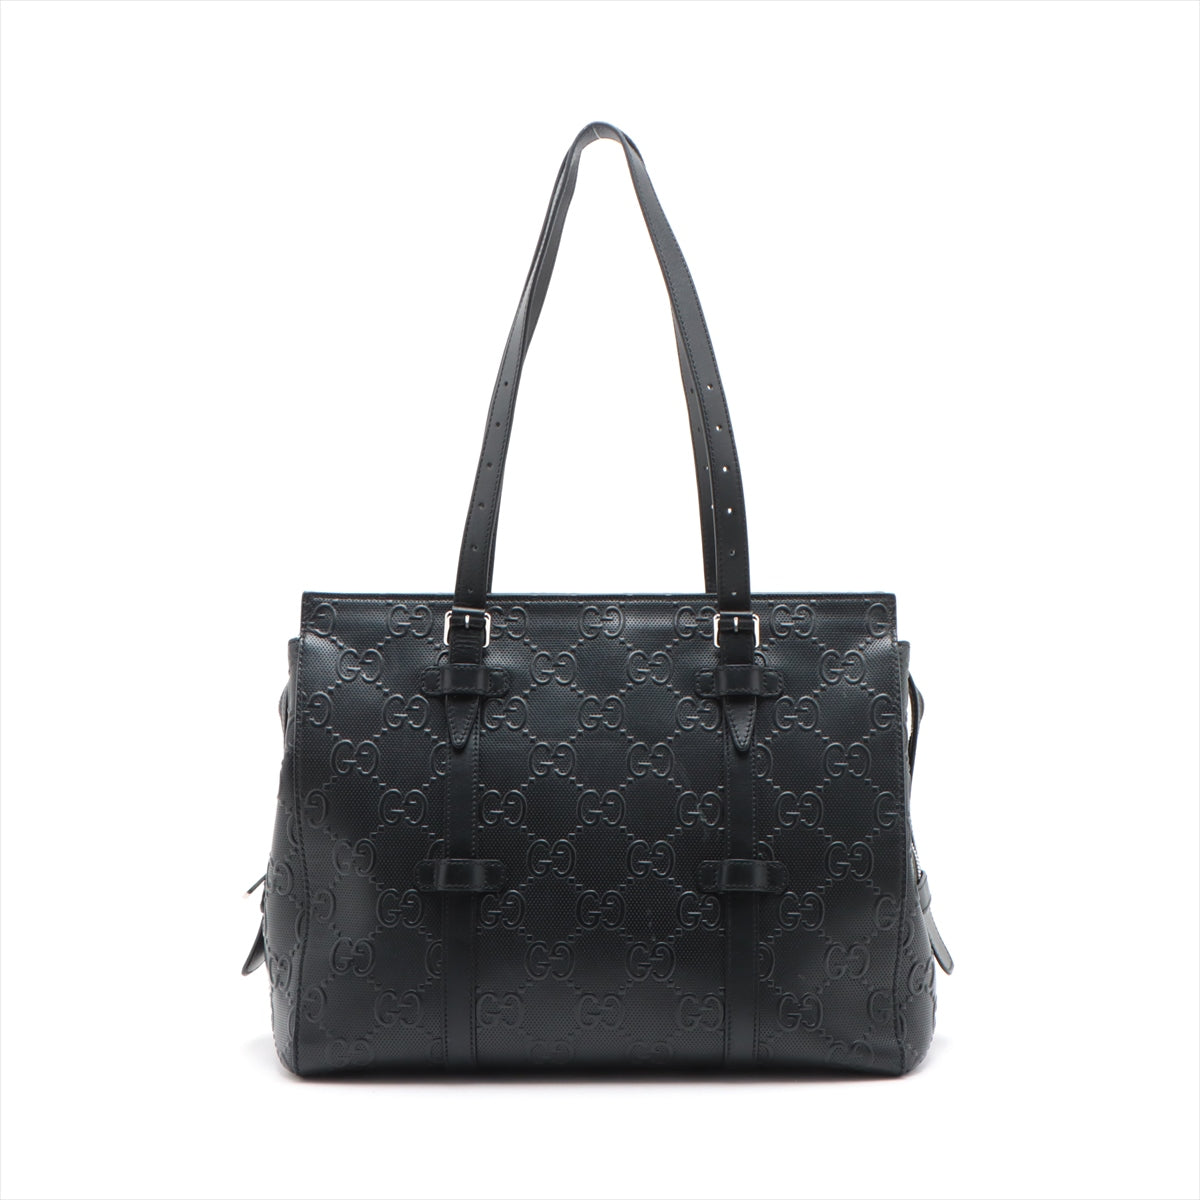 Gucci GG embossed Leather Tote bag Black 625774